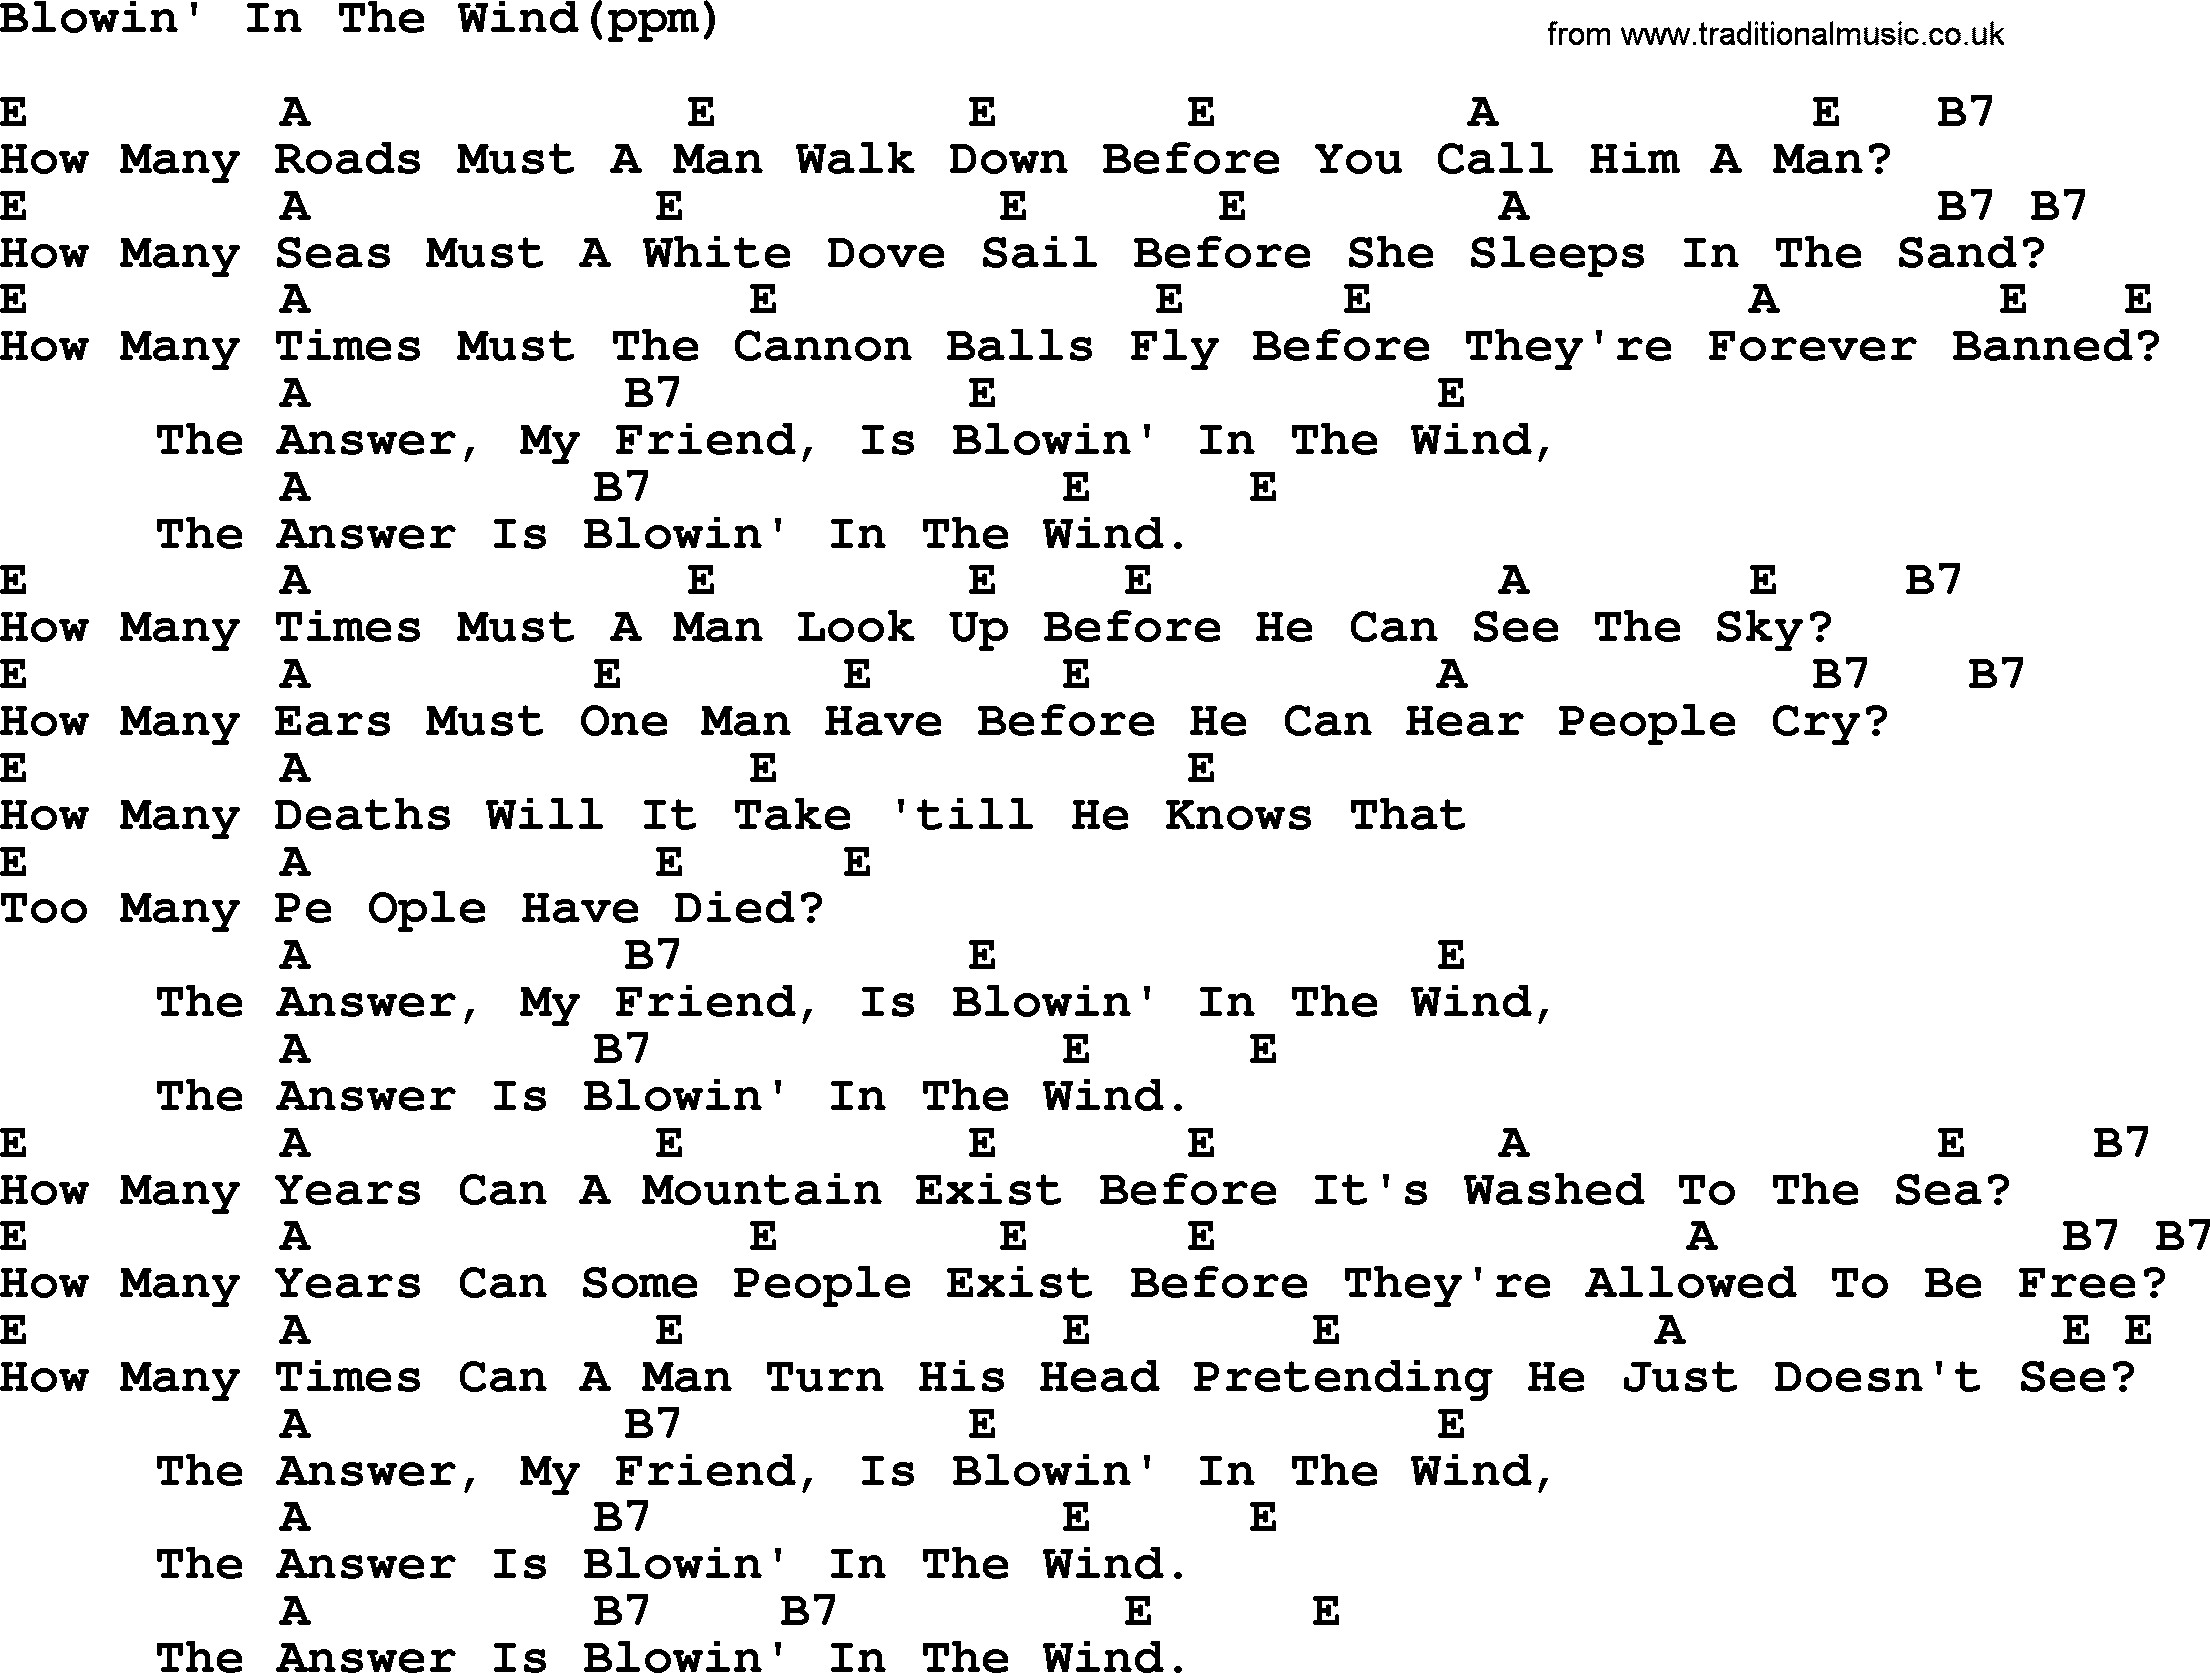 Peter Paul And Mary Song Blowin In The Wind Lyrics And Chords